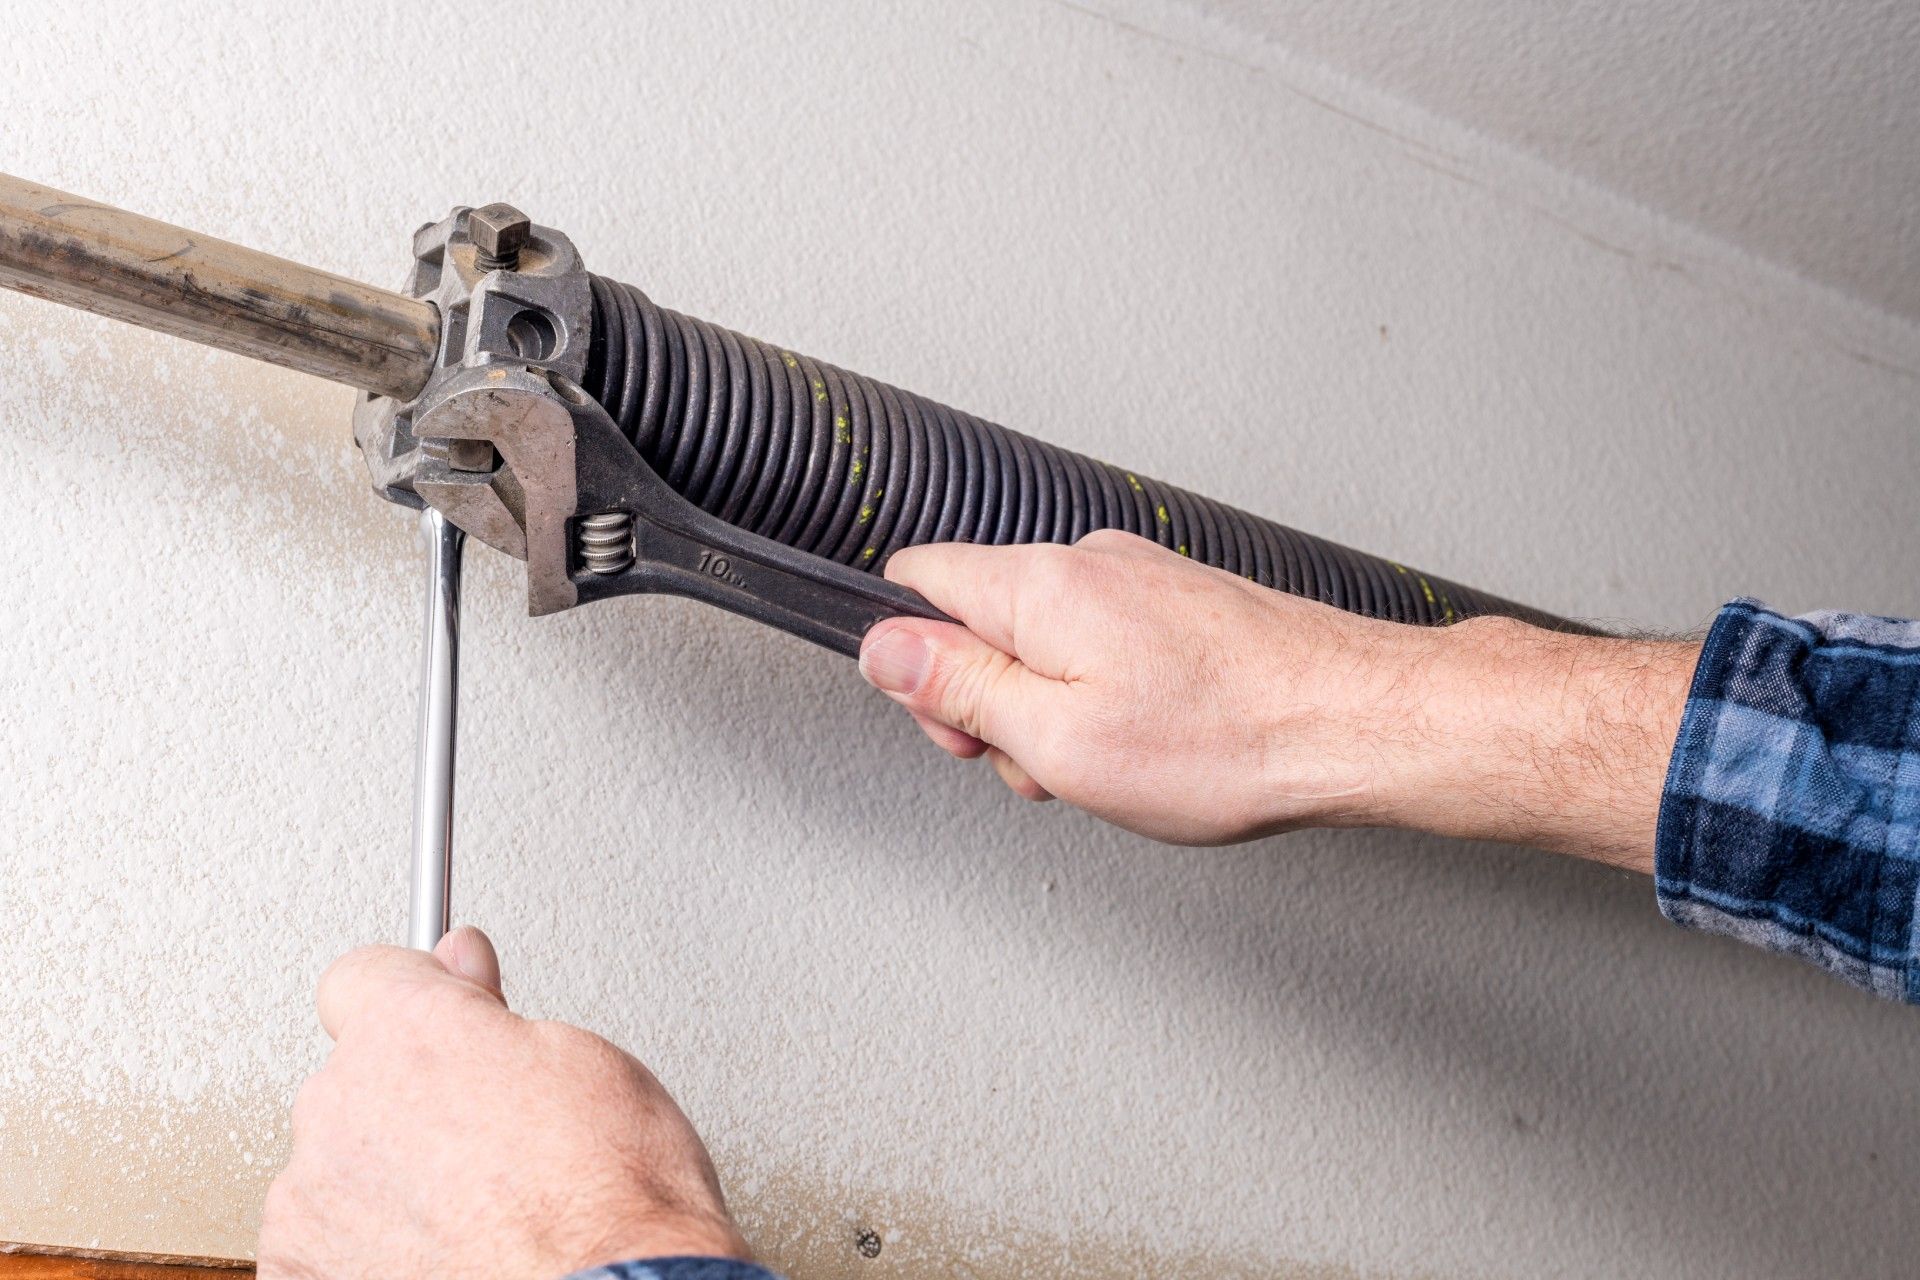 A Man Is Fixing a Garage Door Spring with A Wrench.